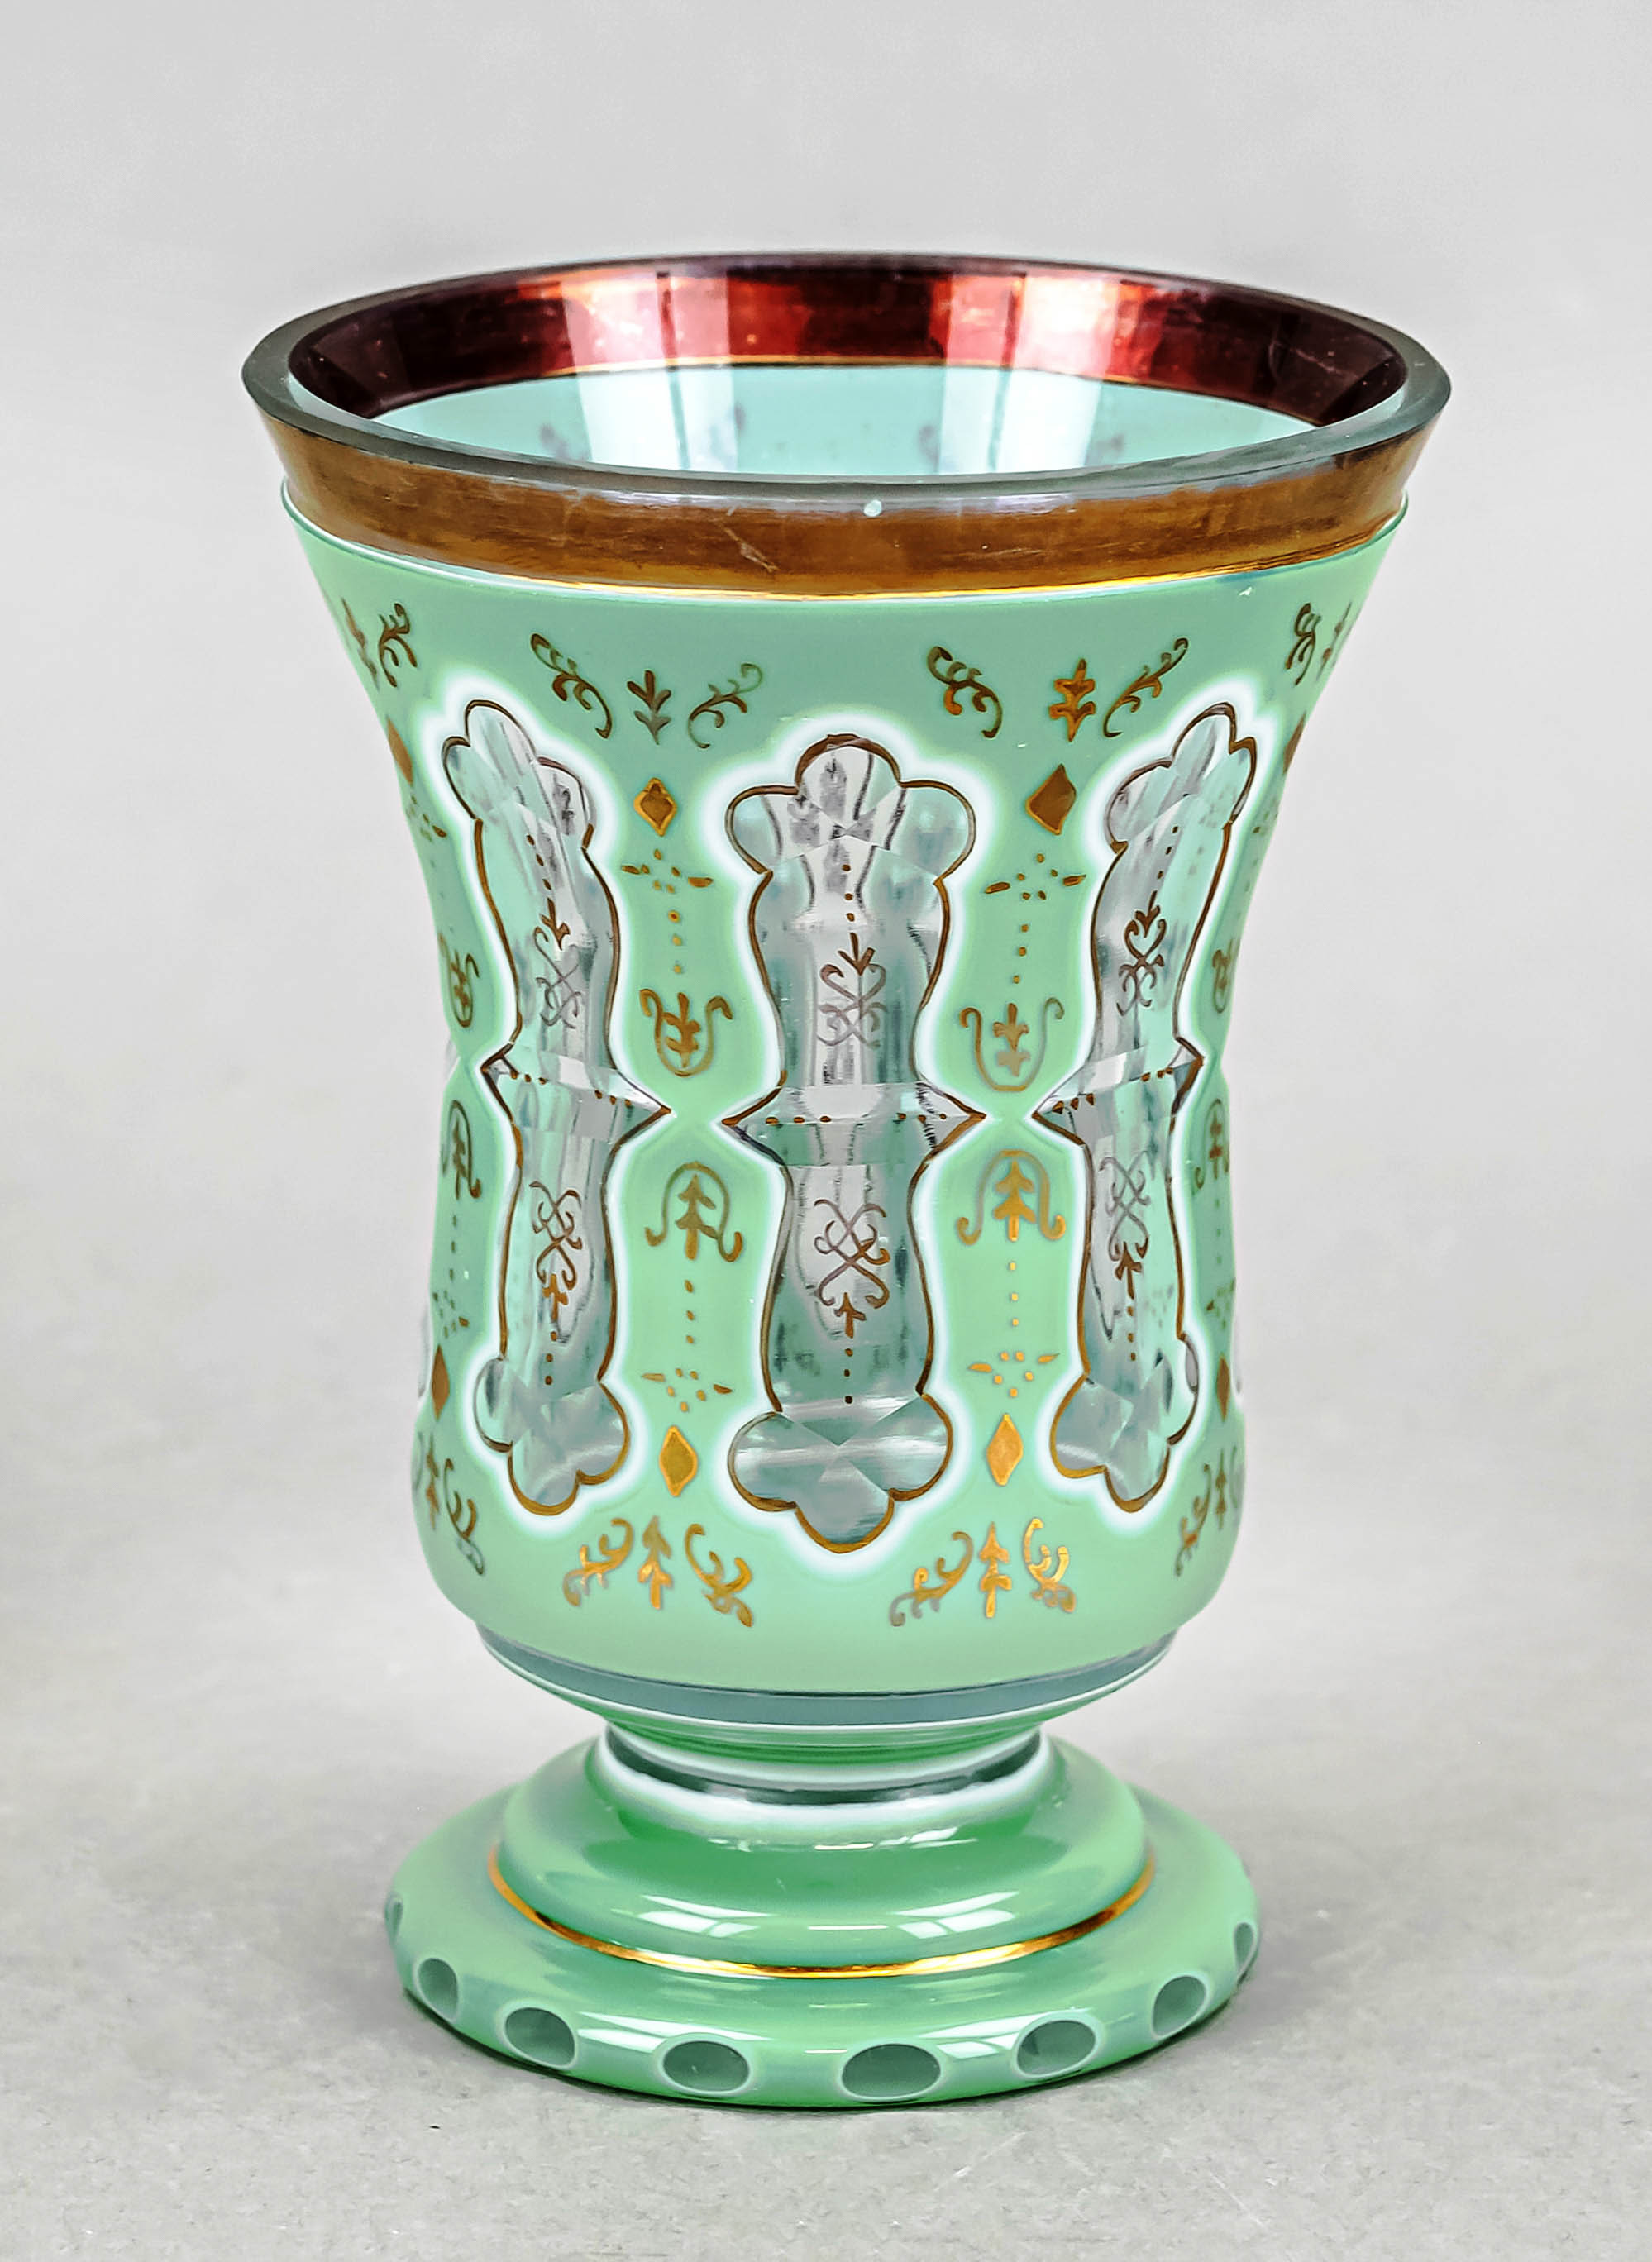 Footed glass, c. 1900, round base, short stem, bell-shaped bowl, clear glass, partly green and white